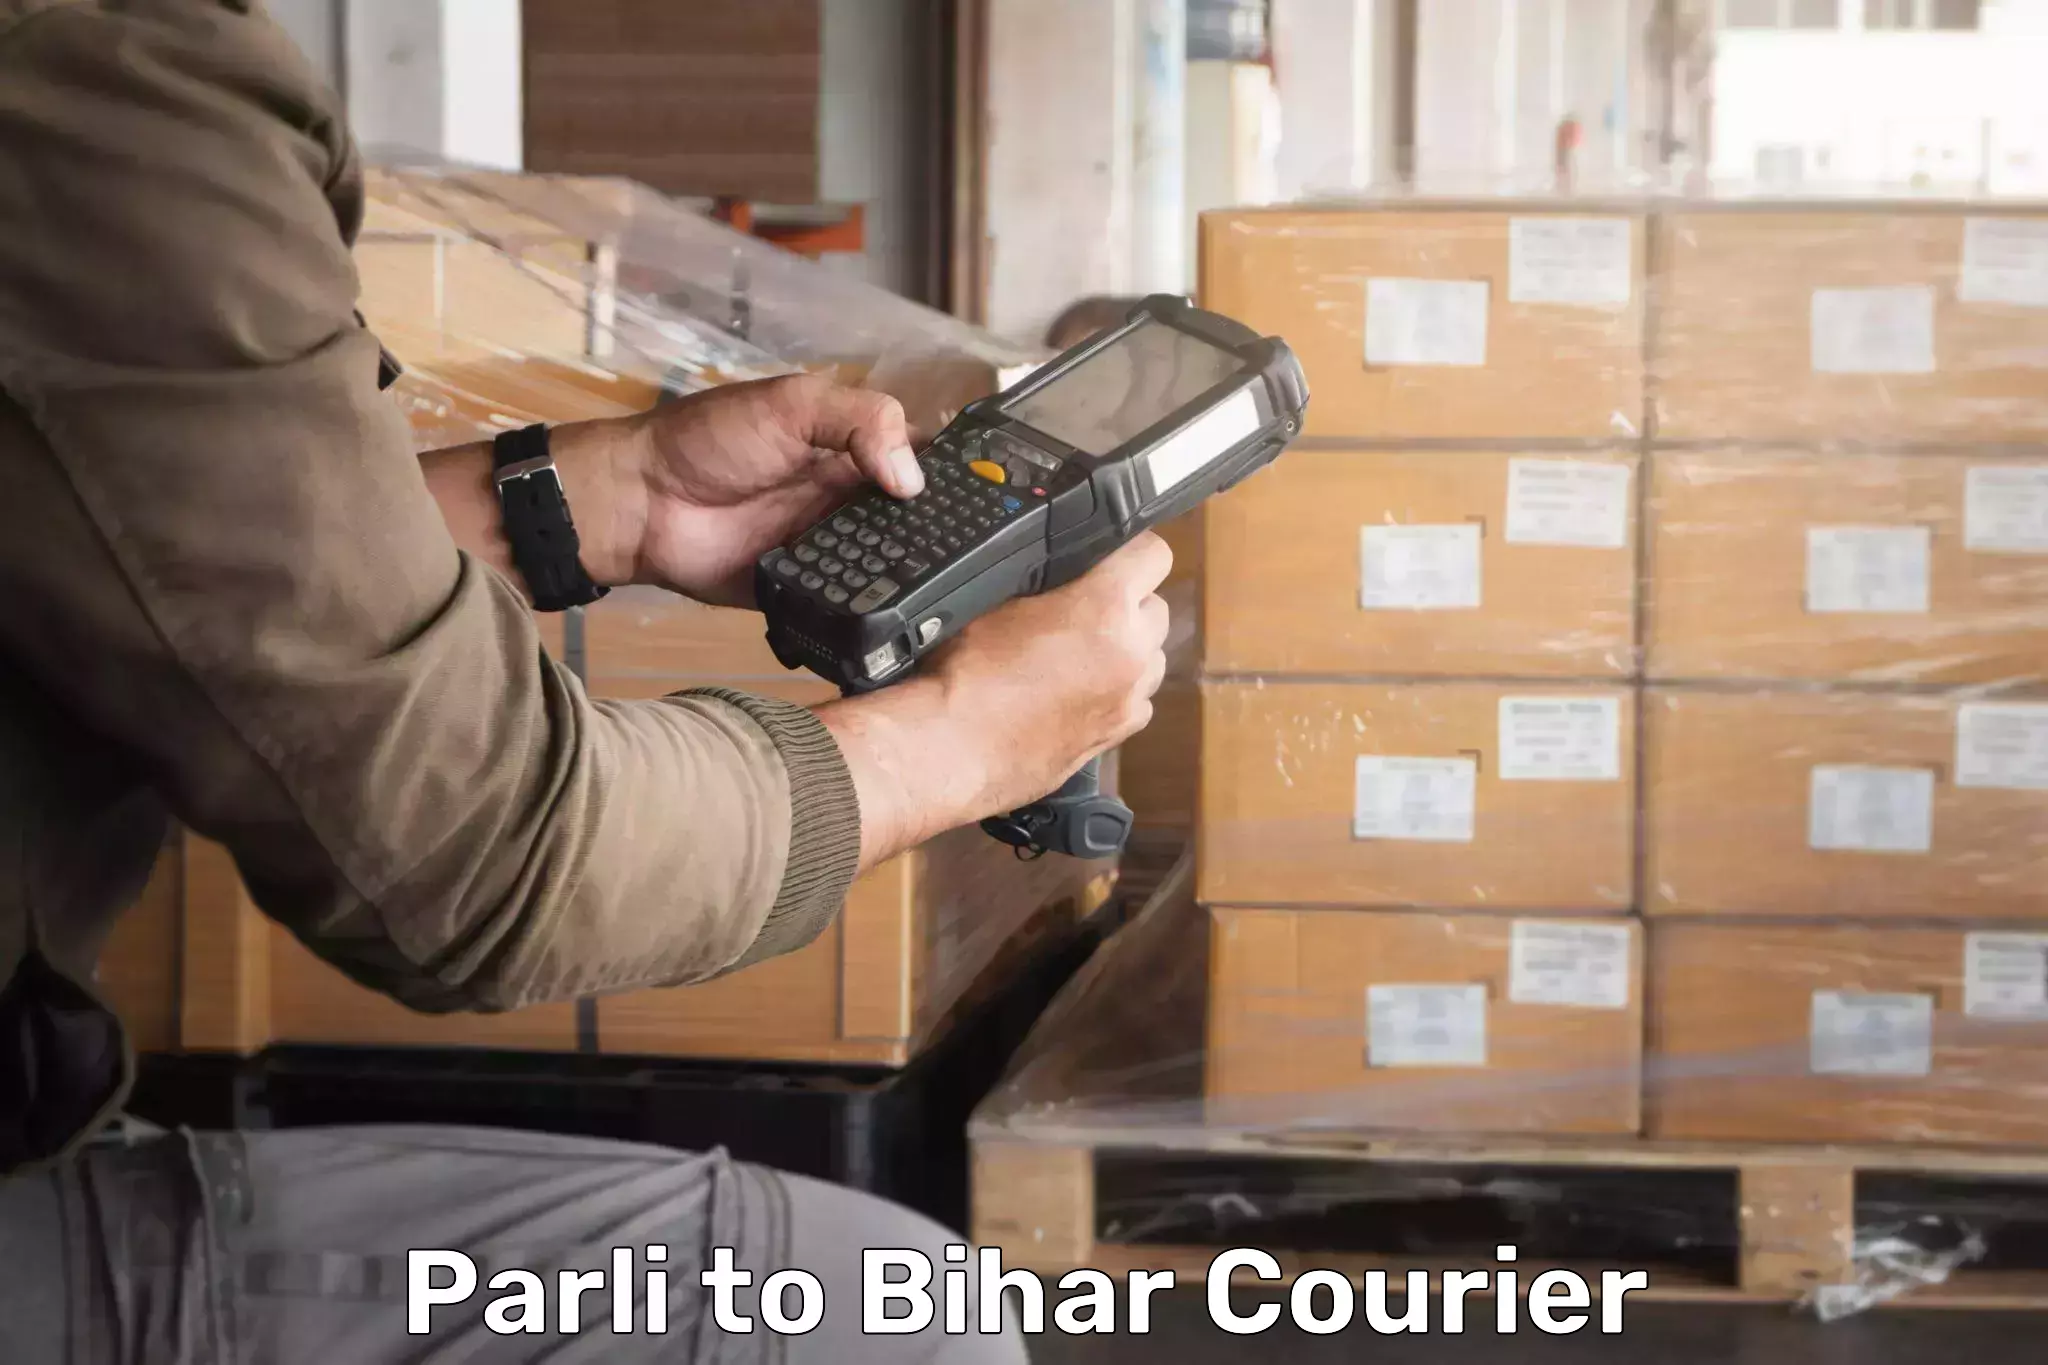 Global courier networks Parli to Mahnar Bazar